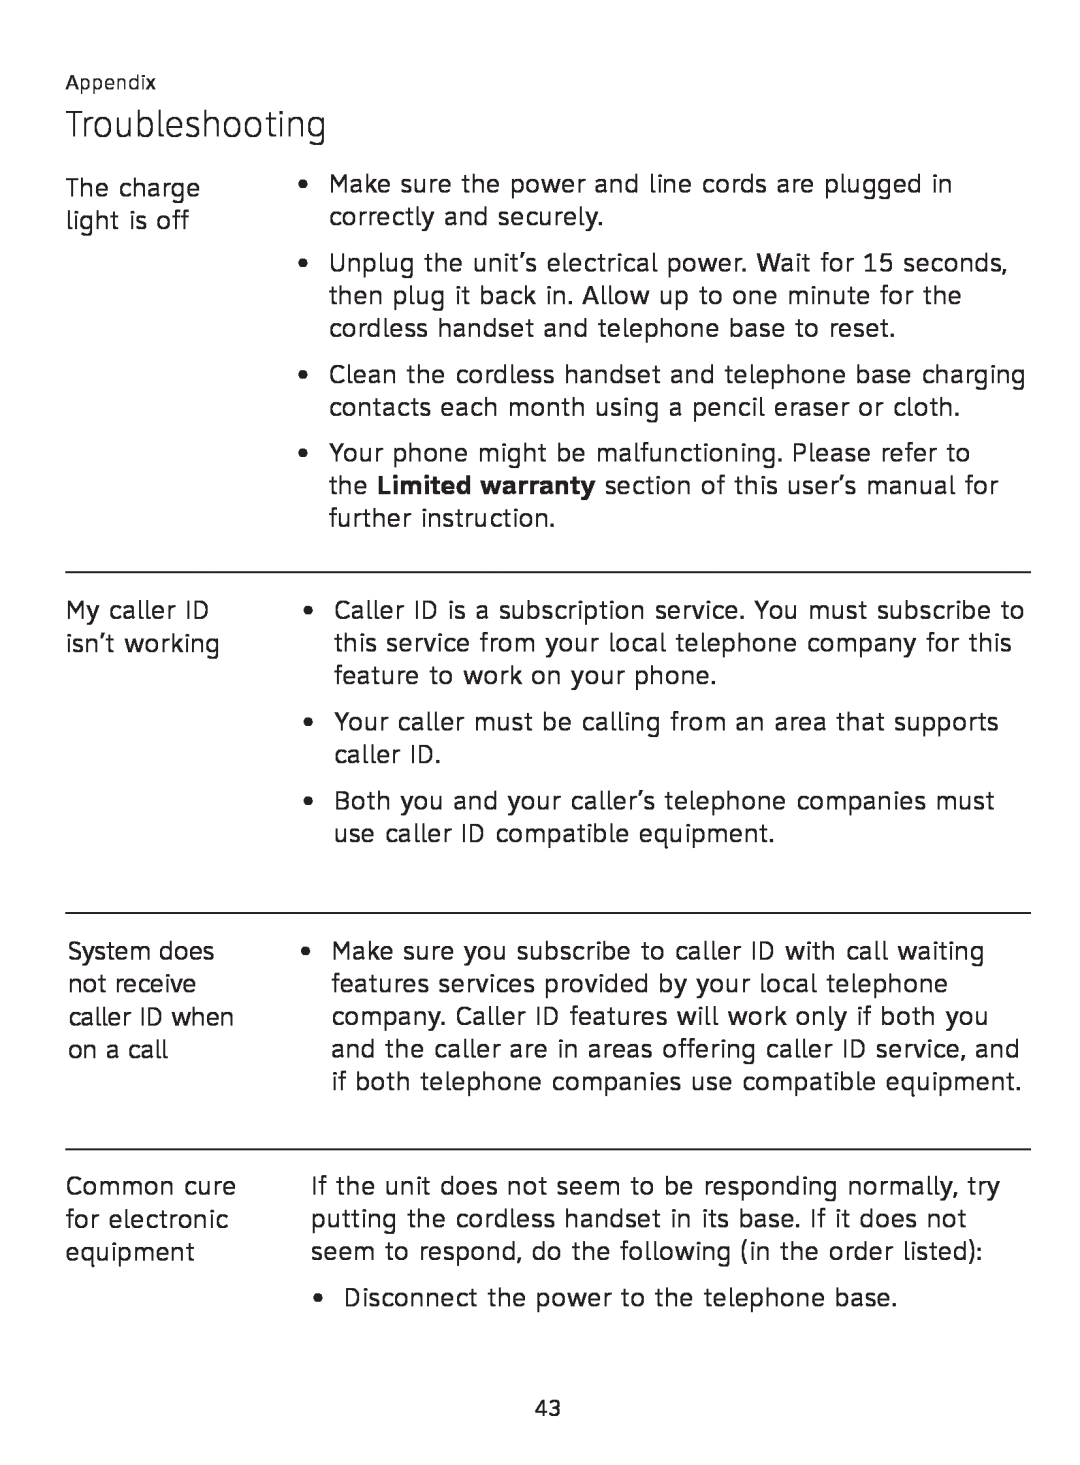 AT&T AT3111-2 user manual Troubleshooting, The charge light is off 